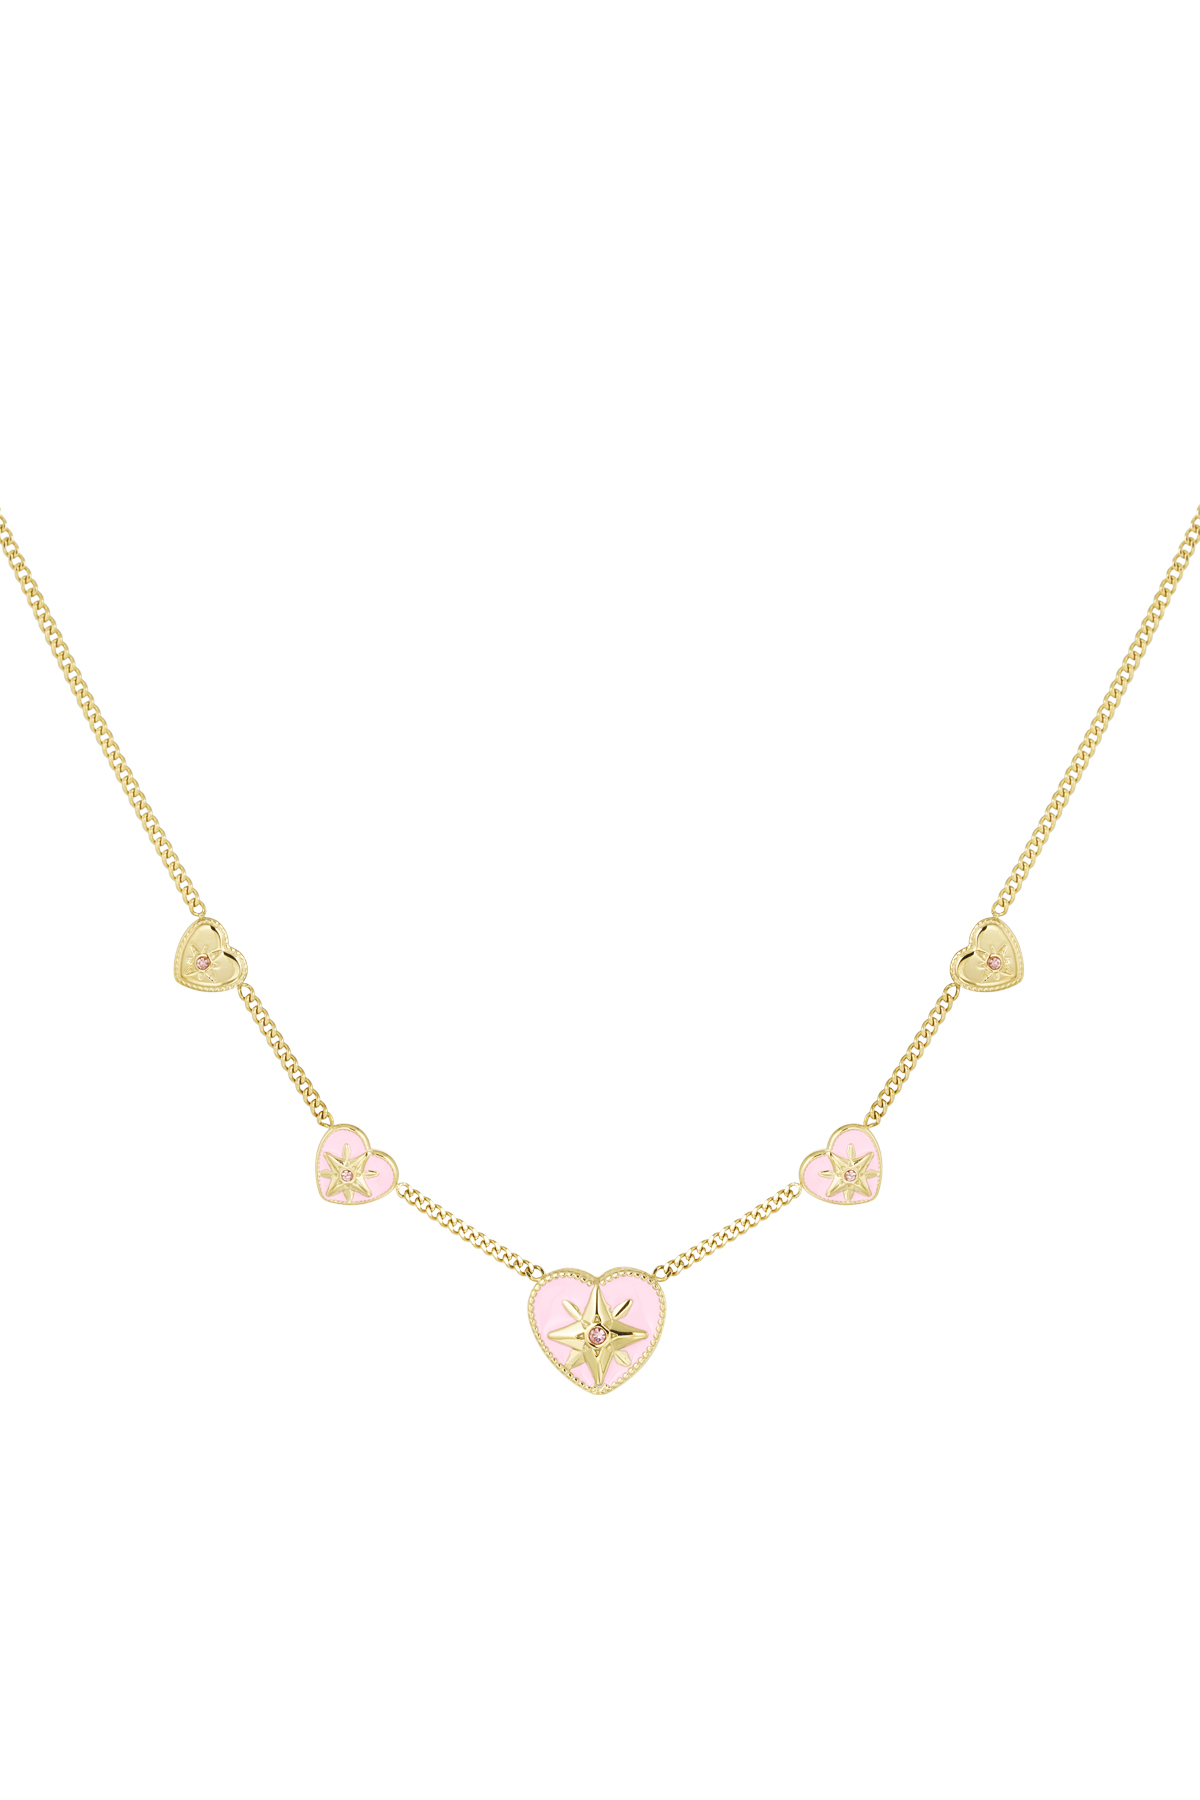 Necklace 5 hearts pink - gold h5 